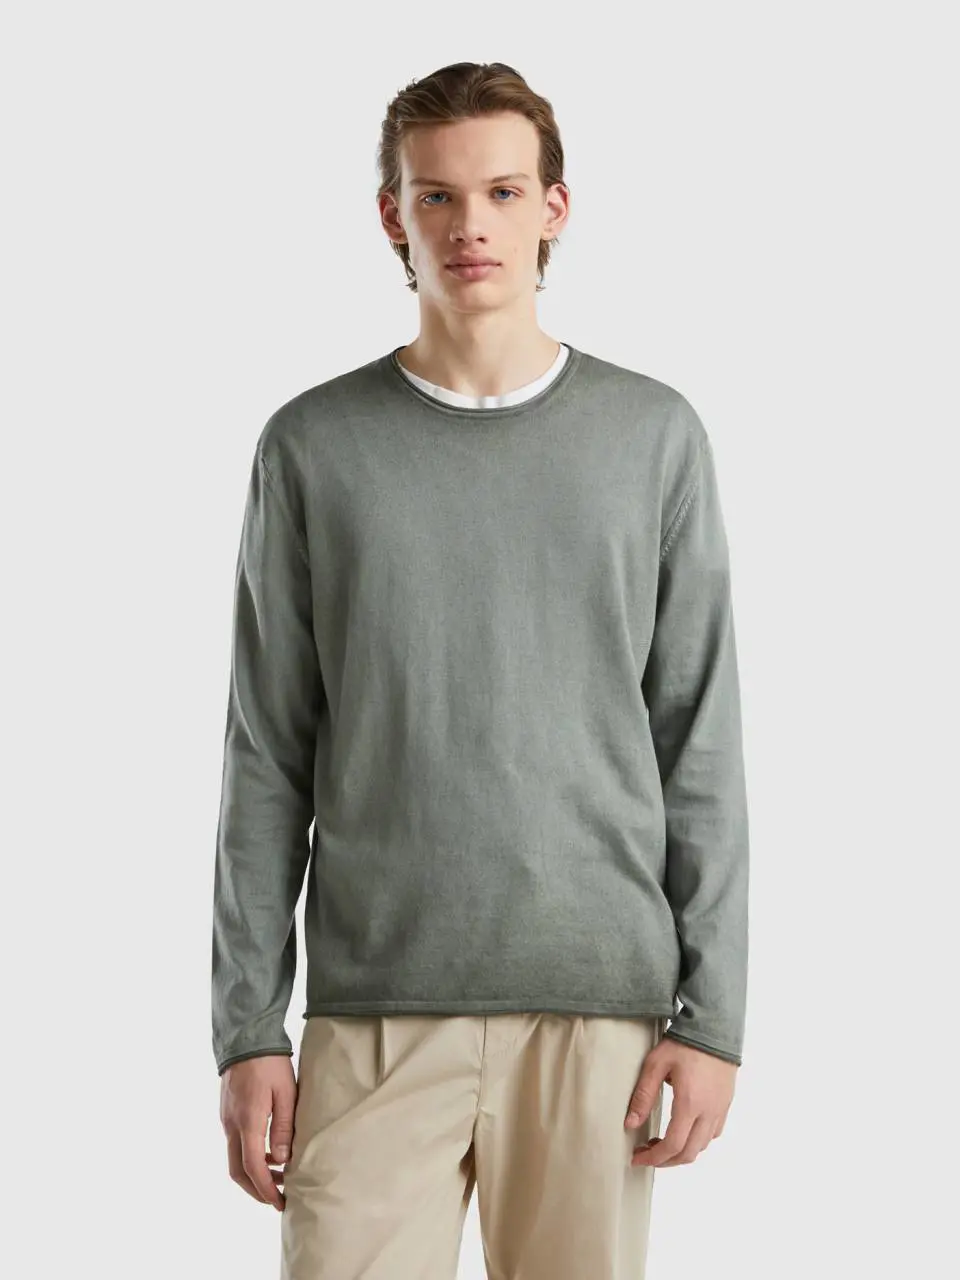 Benetton sweater with raw cut finish. 1